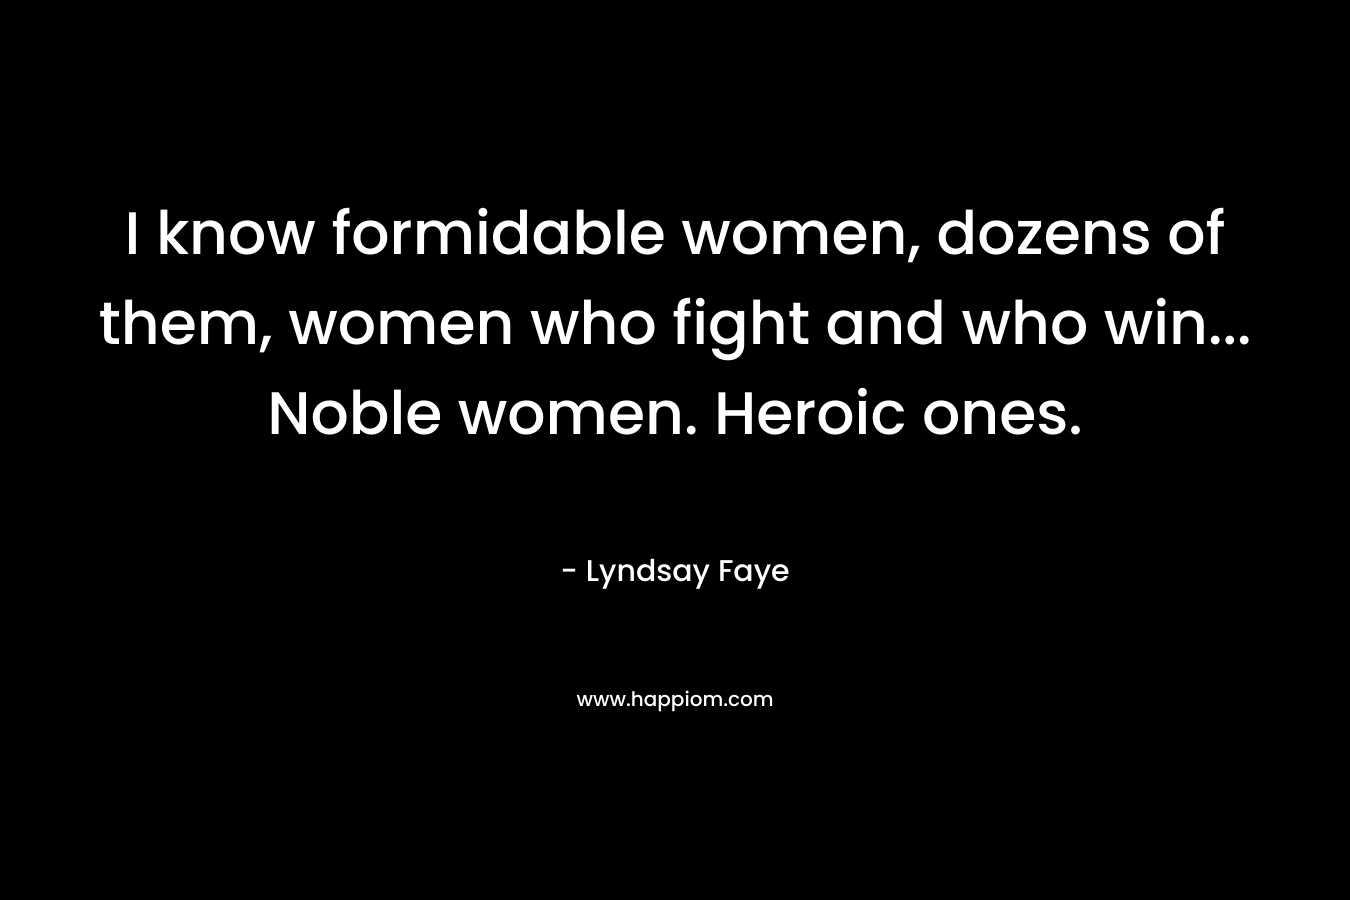 I know formidable women, dozens of them, women who fight and who win... Noble women. Heroic ones.